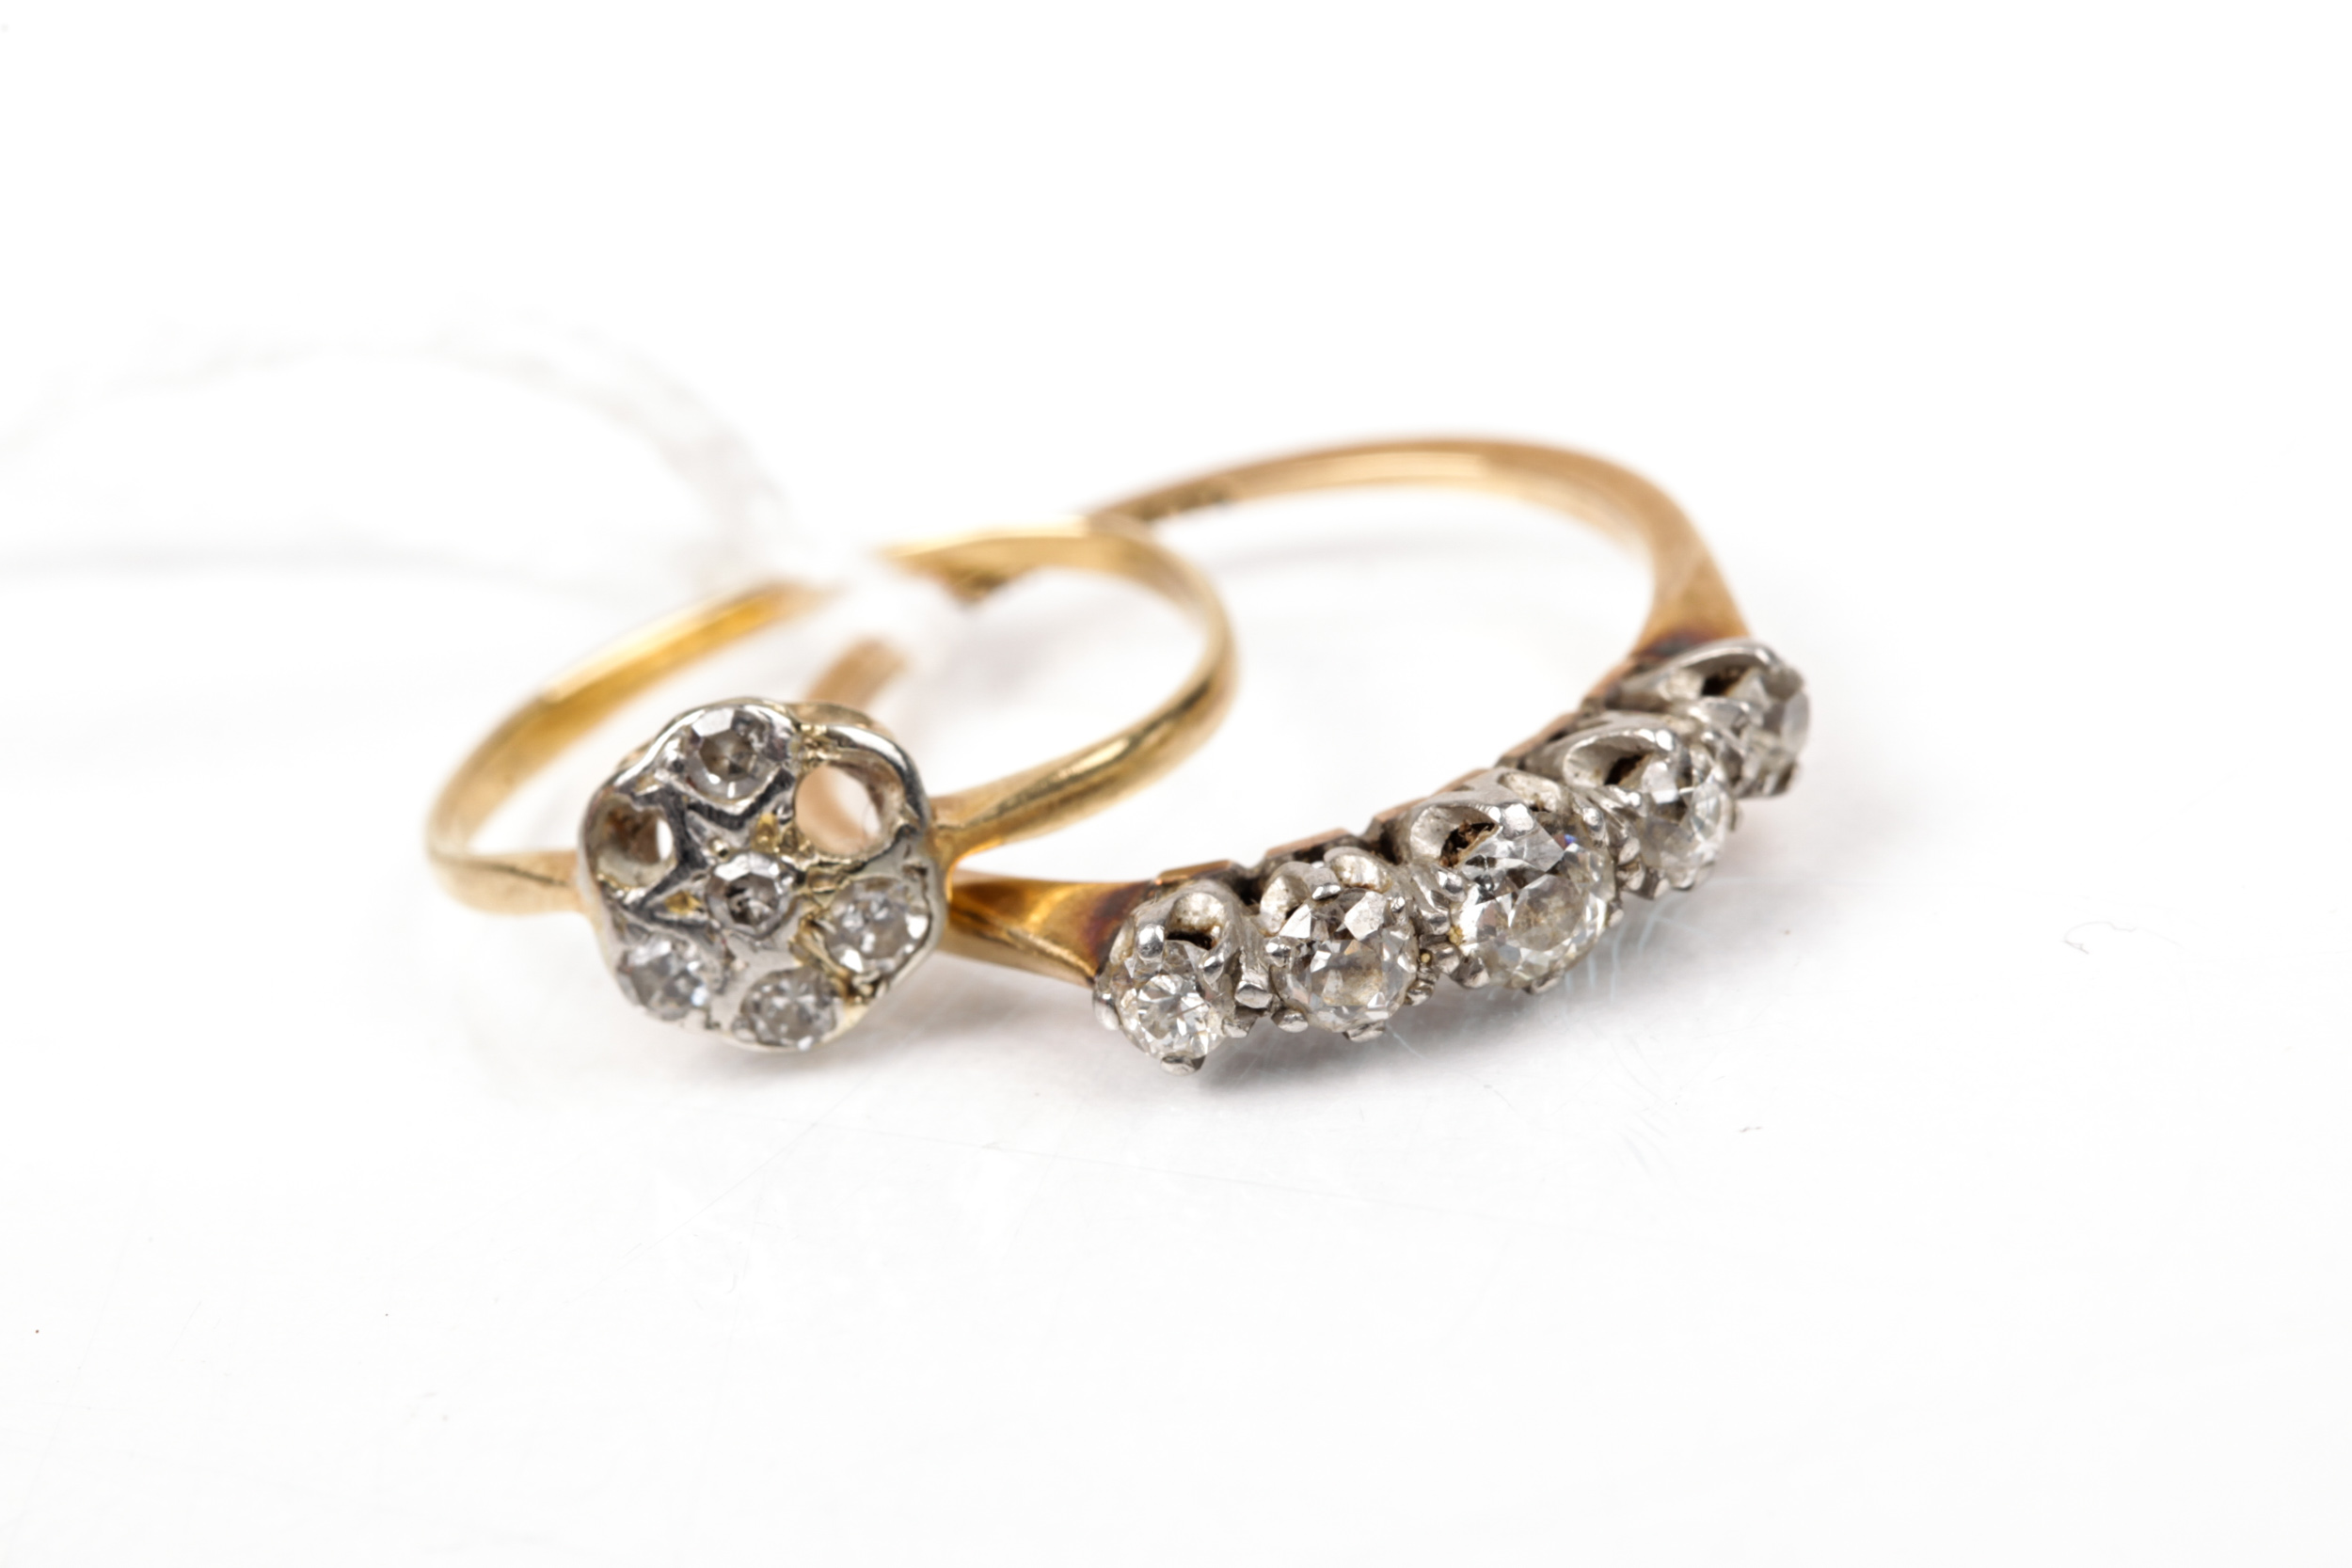 Two early 20th century gold and diamond rings.